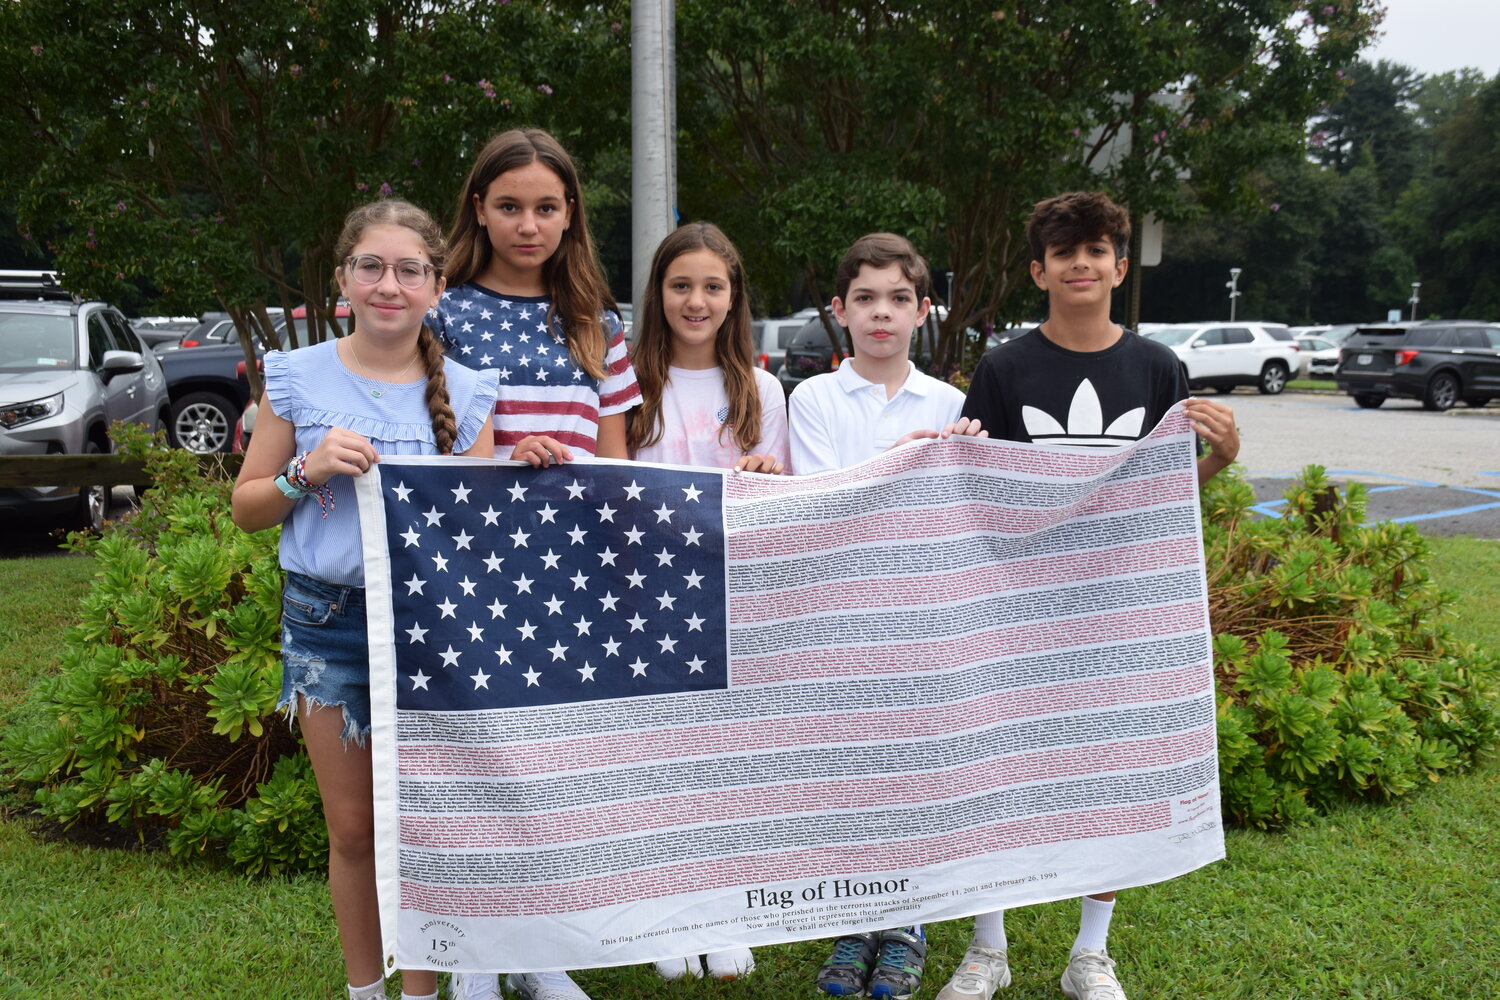 Locust Valley Middle School students Gianna Aldorasi, left, Eva Jaszczuk, Mia Marchand, Christos Pappas and Logan Moran held a flag with the names of all those lives lost during the Sept. 11 attack.